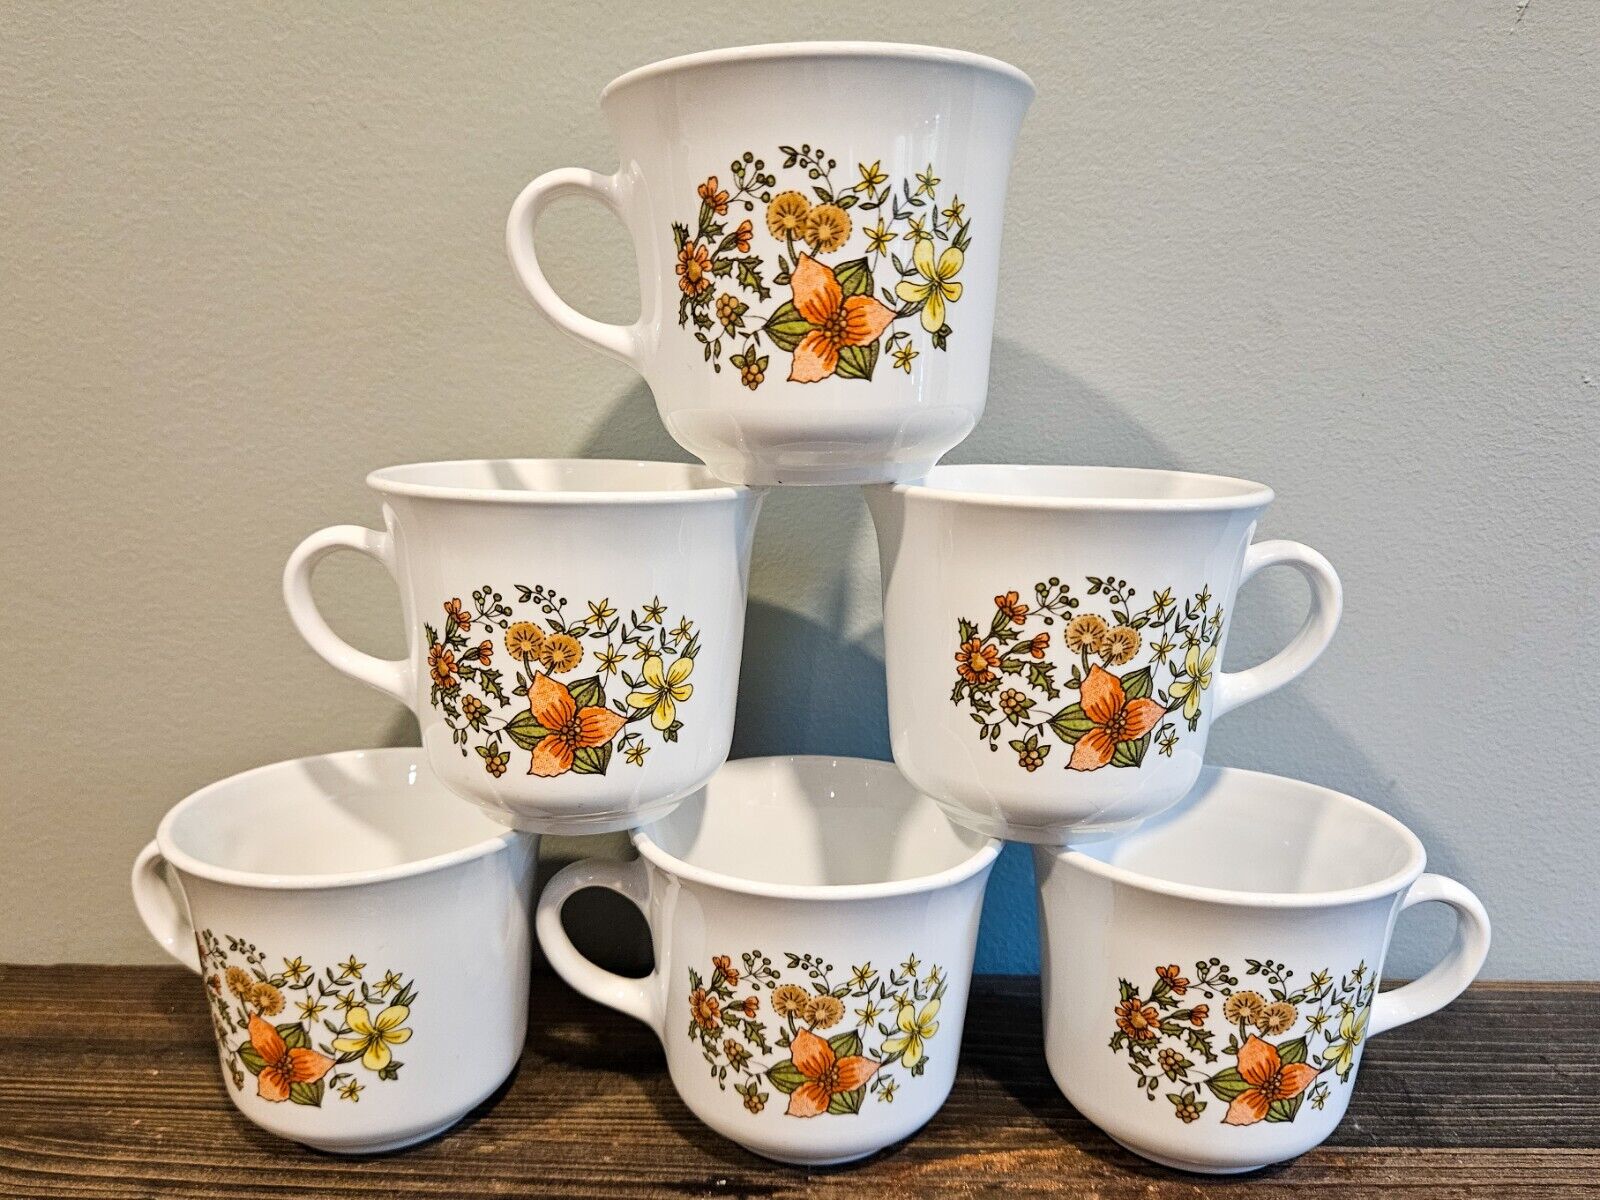 Vintage 1970s Corelle Indian Summer Floral Handled Coffee Tea Cups Set Of 6